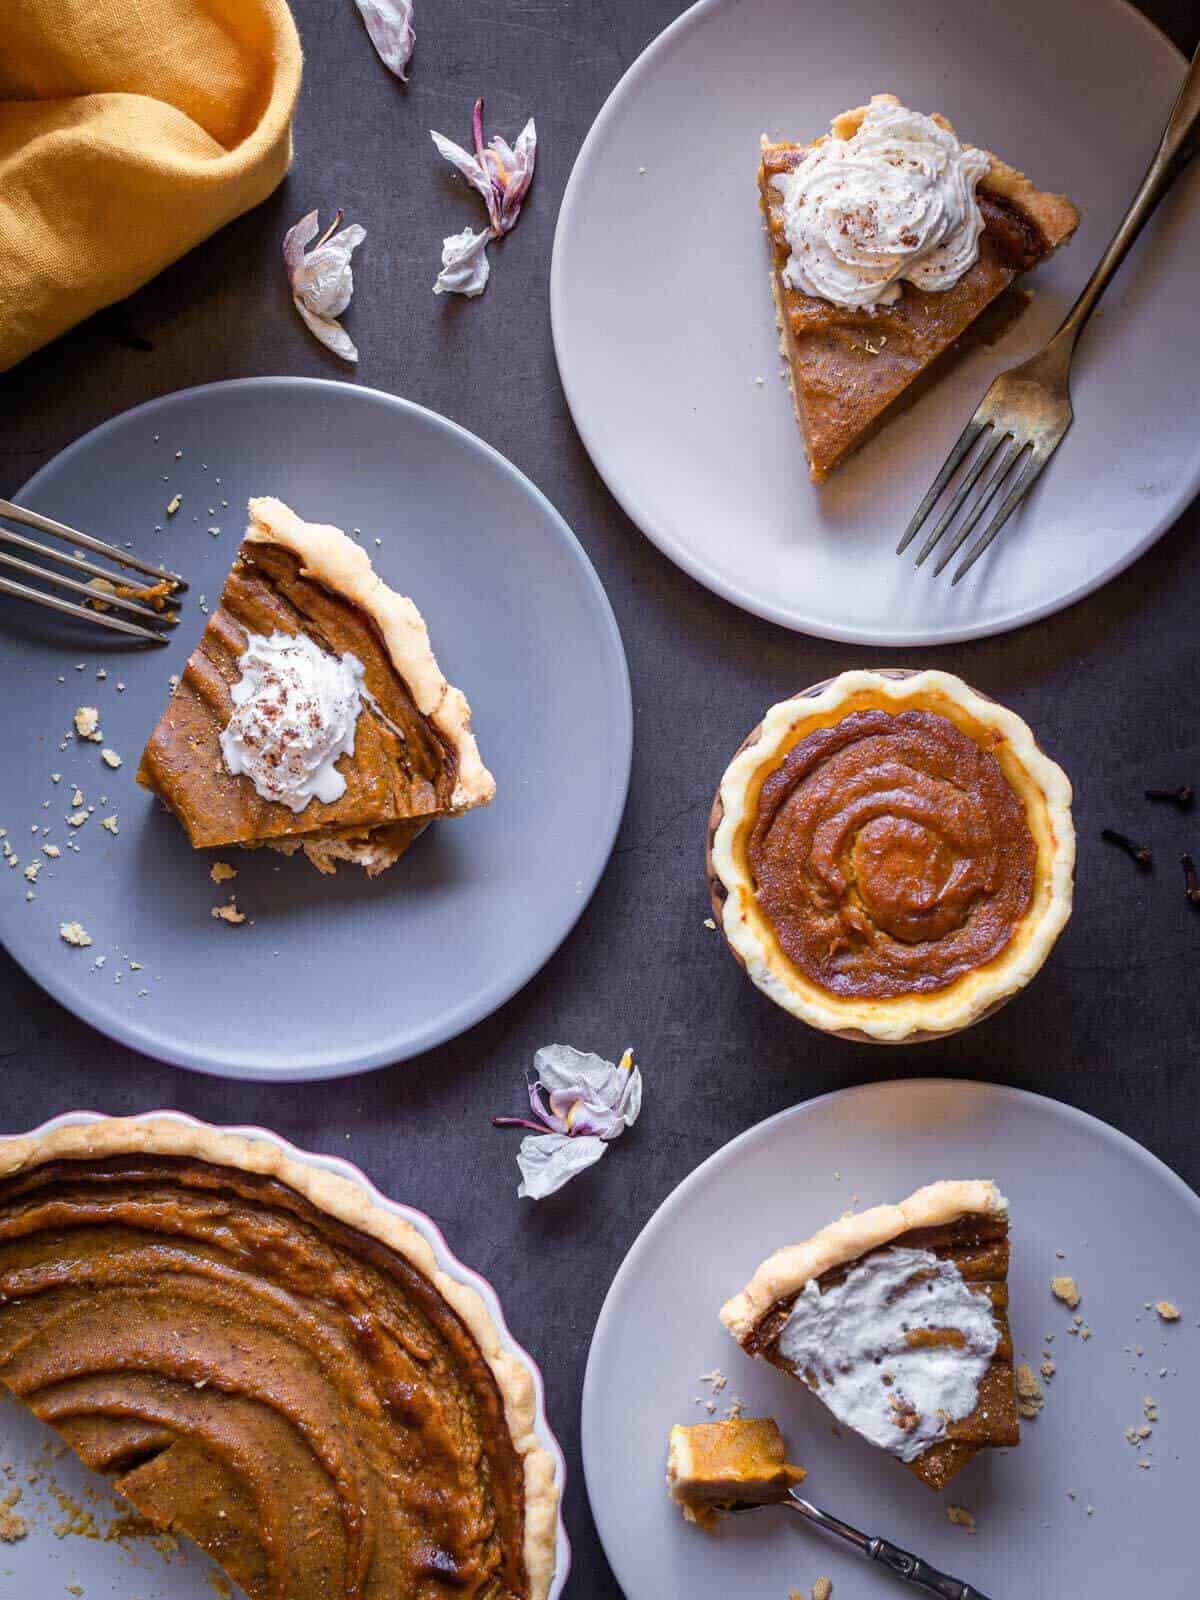 vegan pumpkin pie portions served on small plates and a small one-portion sized pie on its pan.